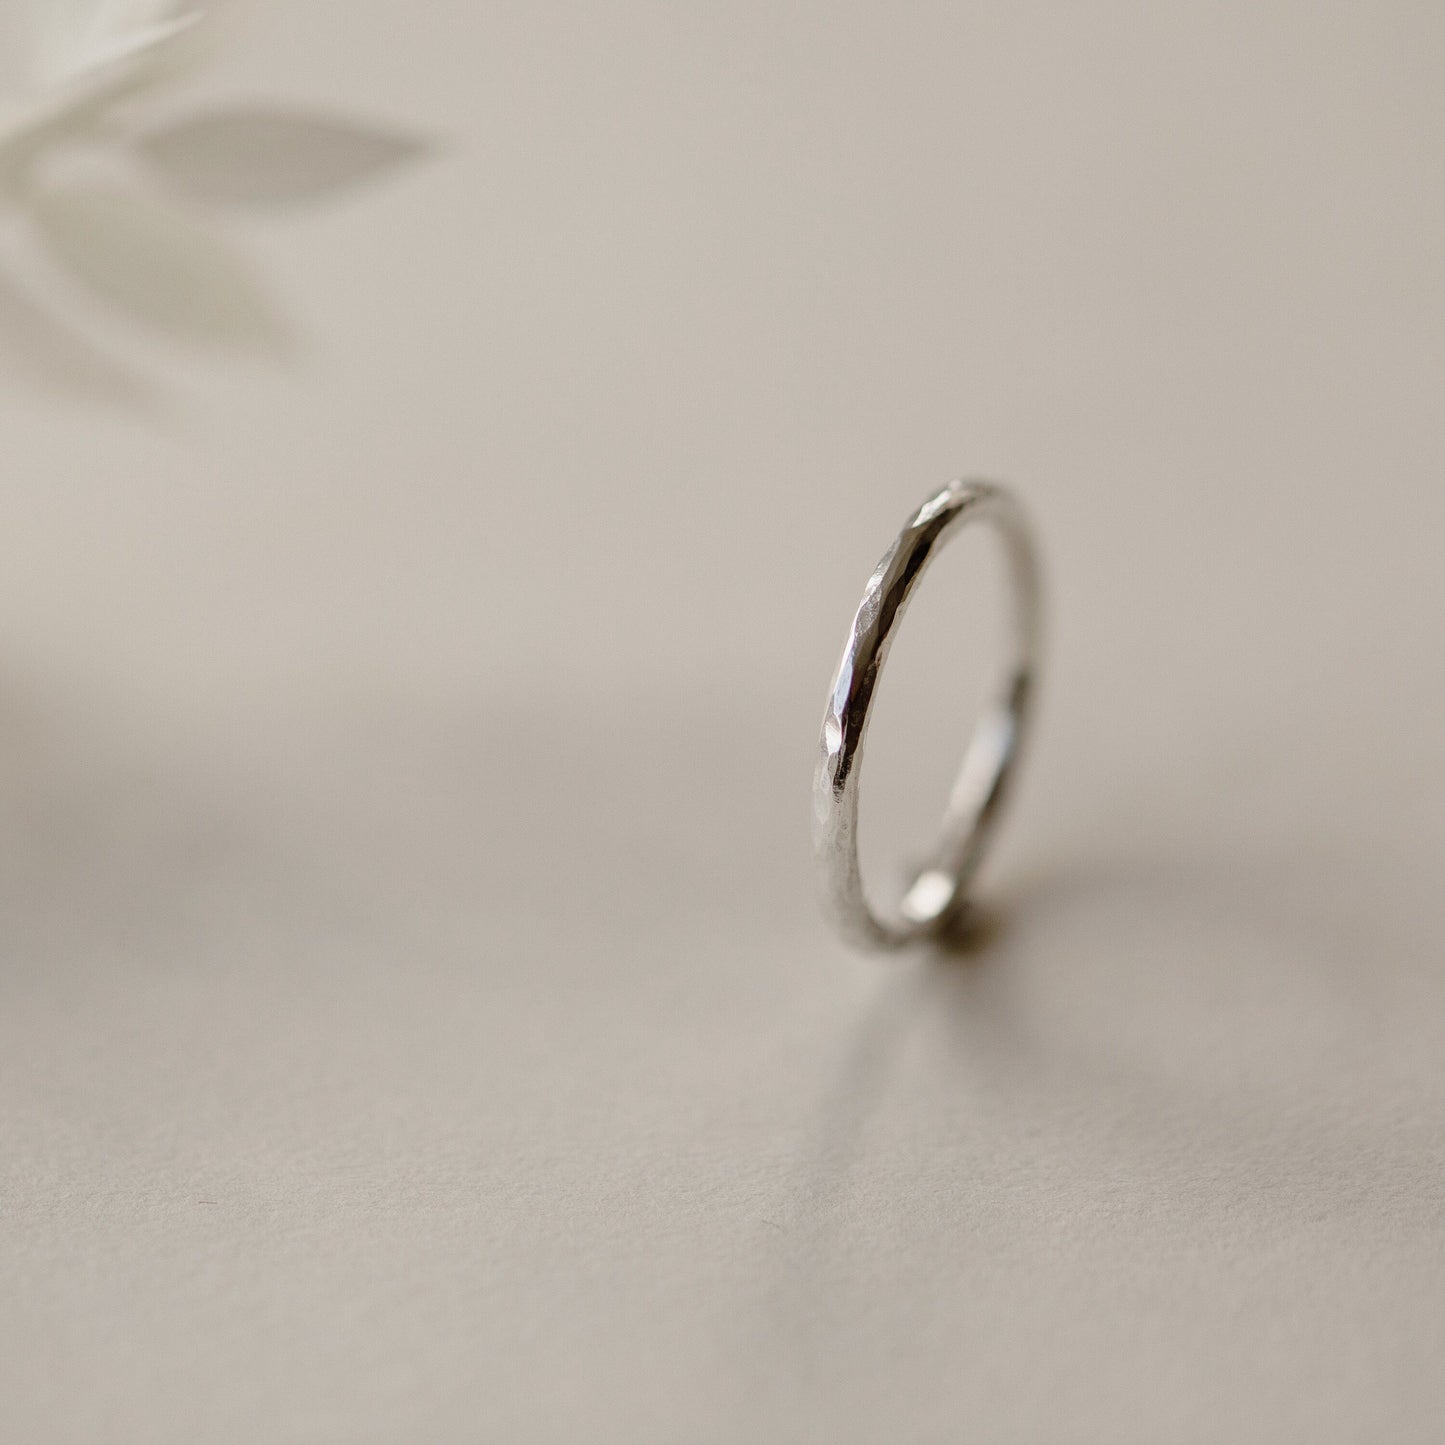 Infinity Silver Ring - Hammered Ring Anna Calvert Jewellery 